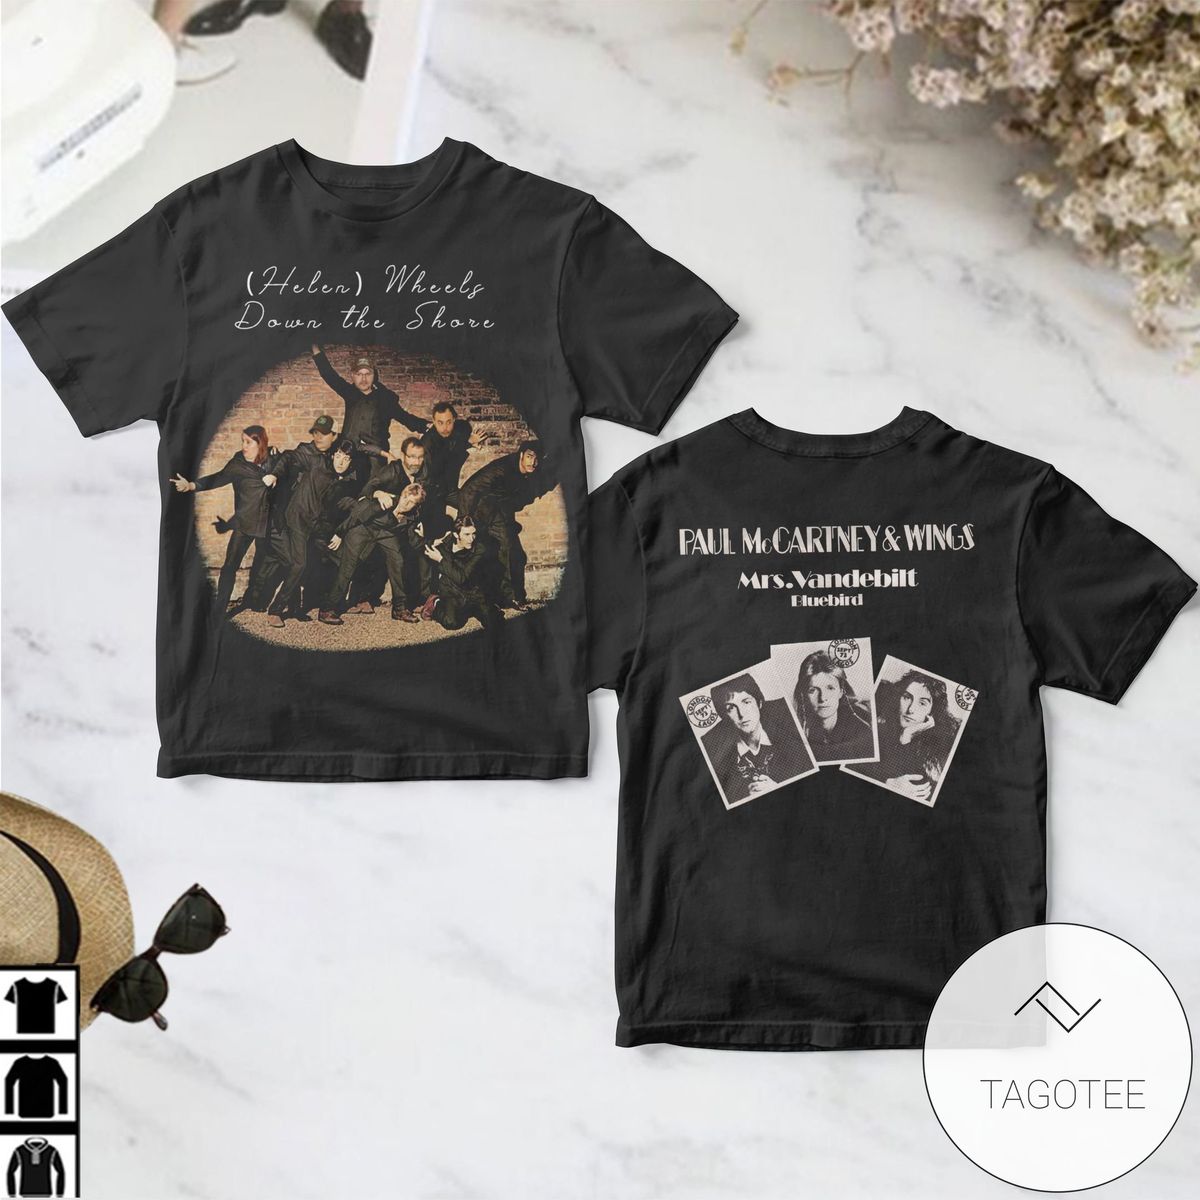 Paul Mccartney And Wings Band On The Run Album Cover Shirt